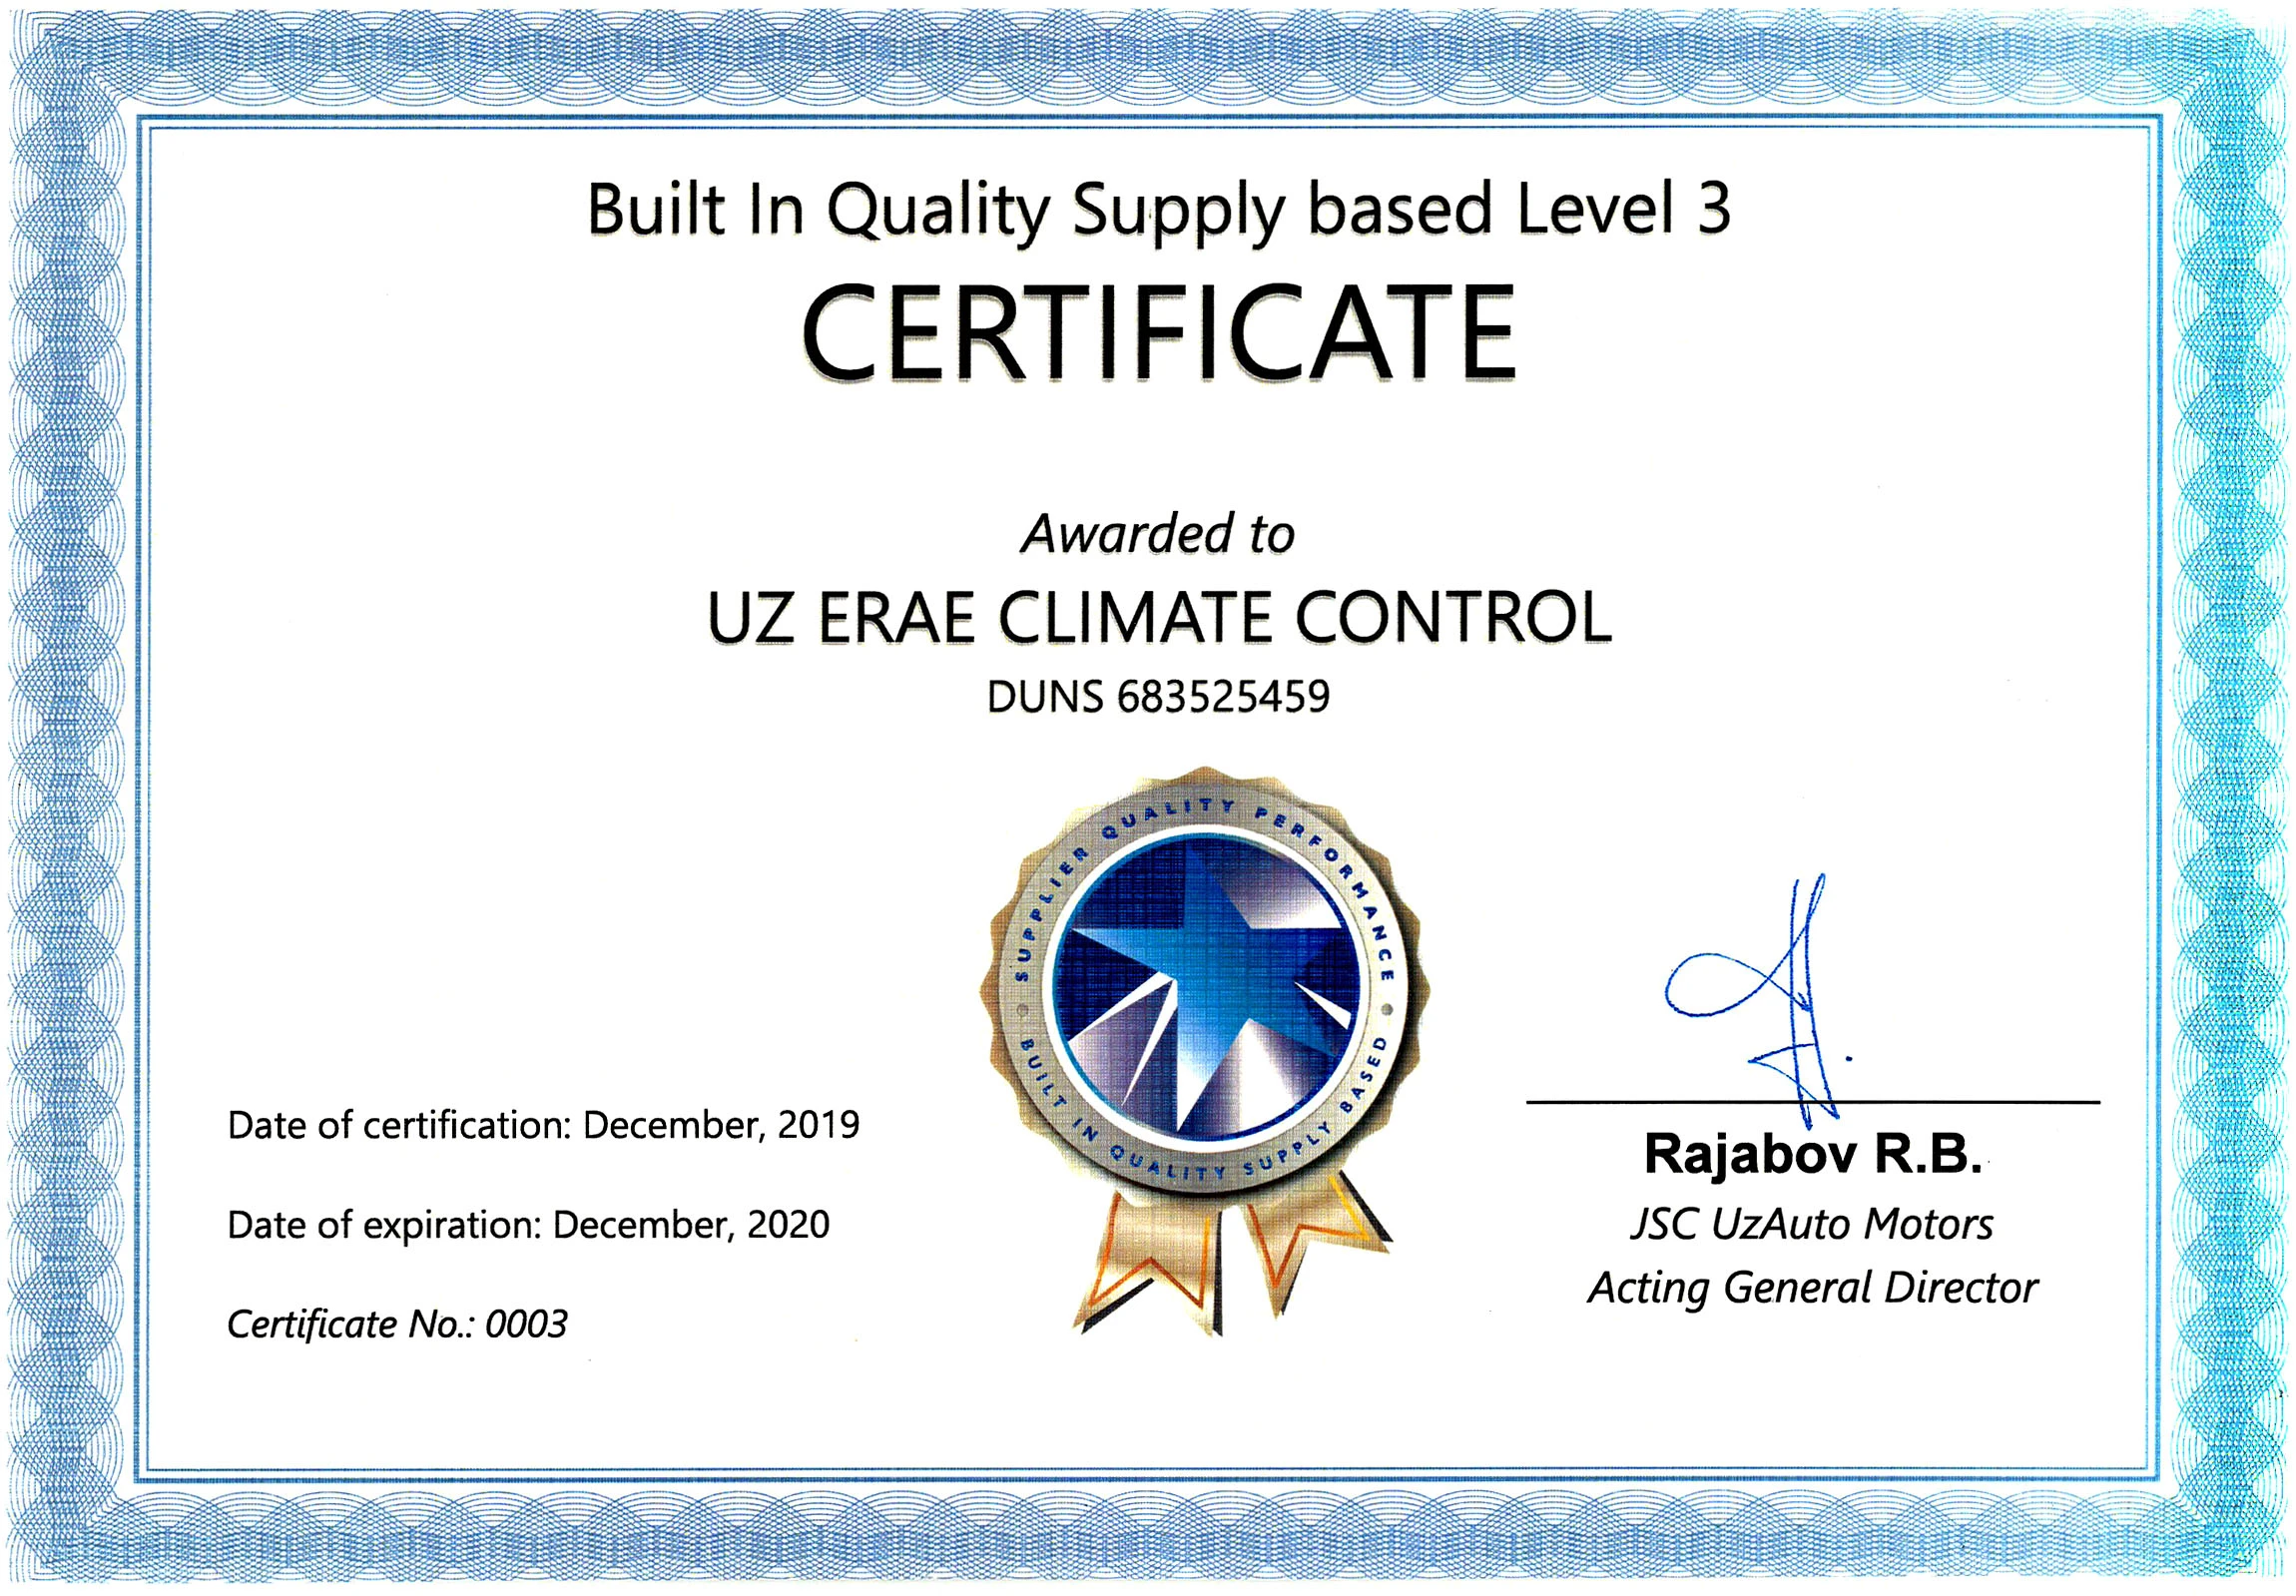 Built in Quality Supply based Level 3 Certificate